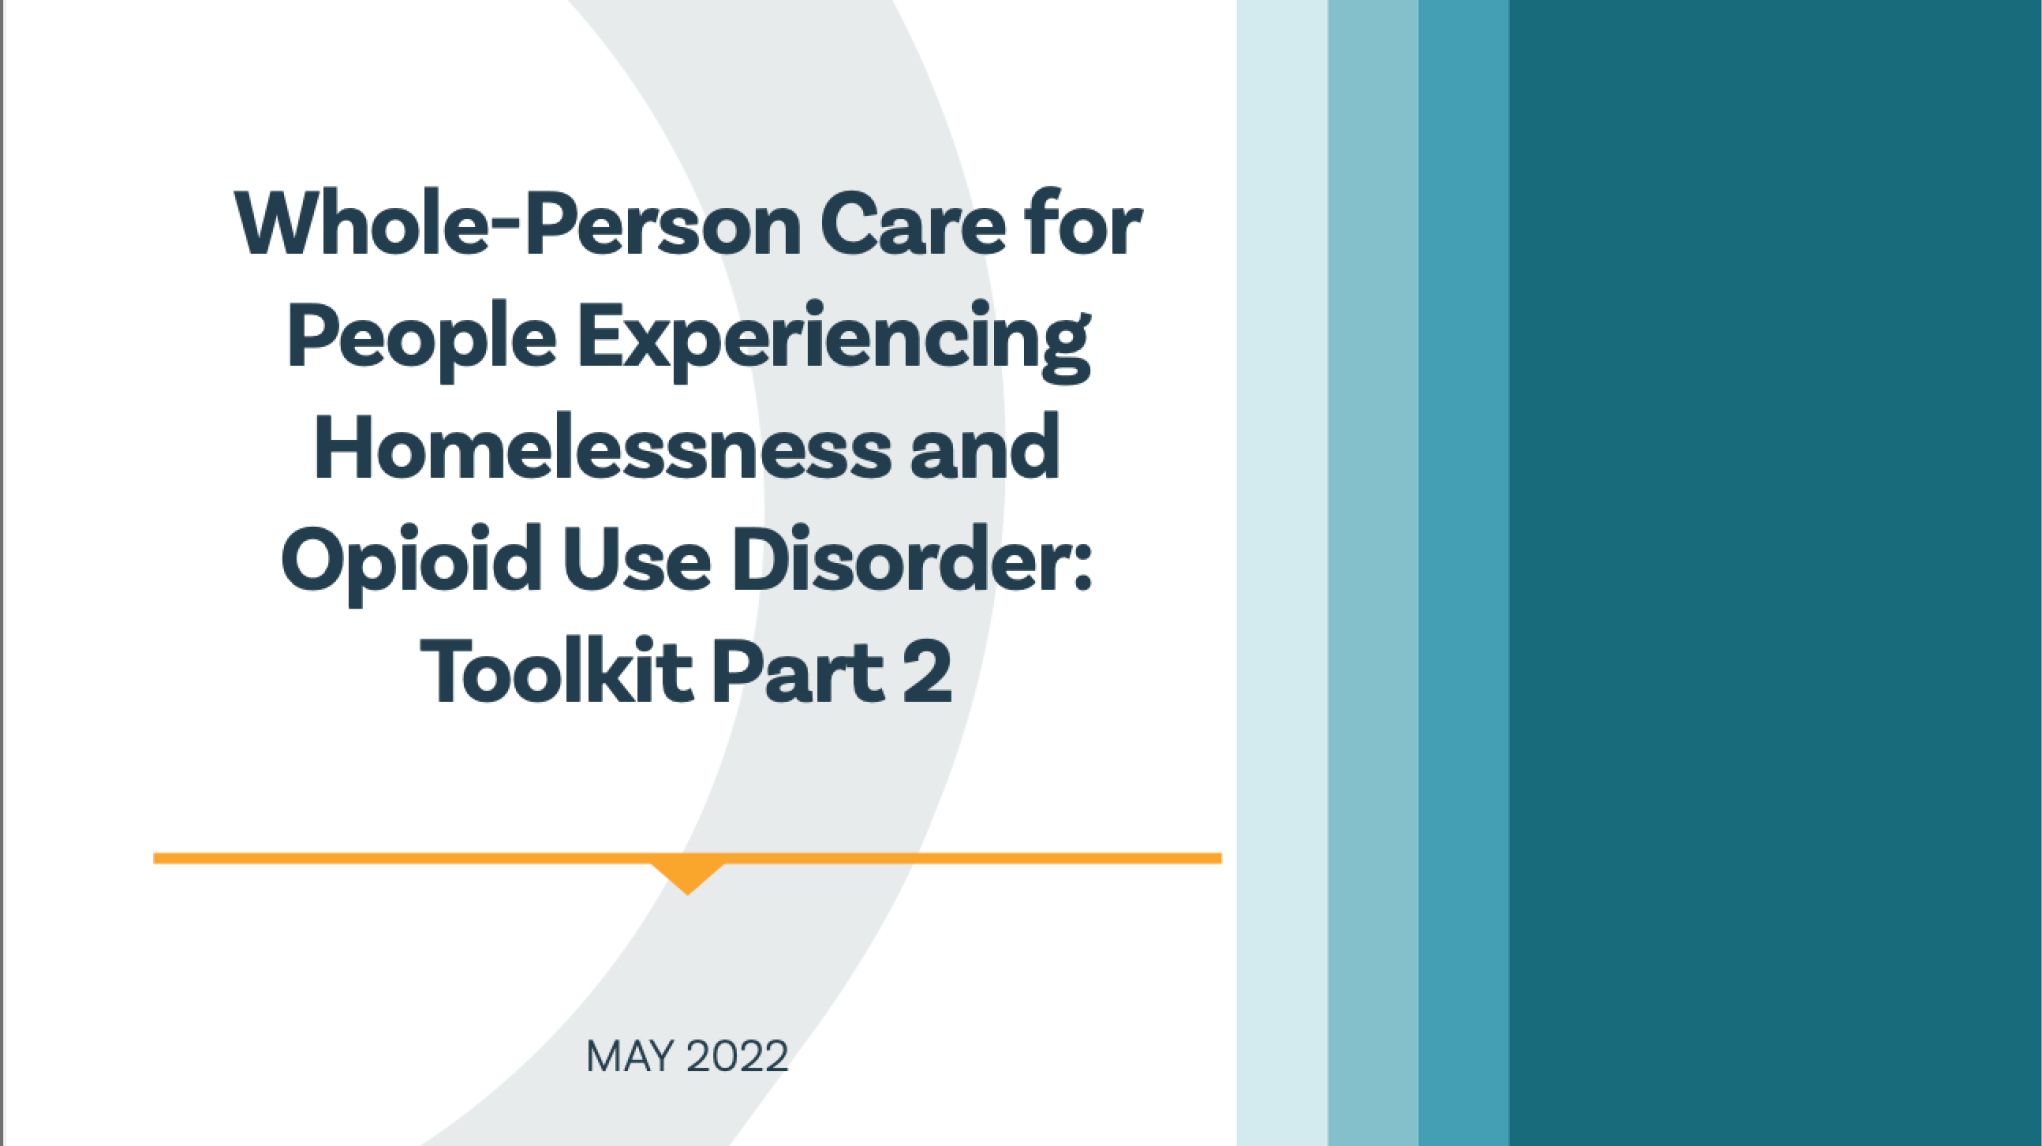 Whole-Person Care for People Experiencing Homelessness and Opioid Use Disorder: Toolkit Part 2